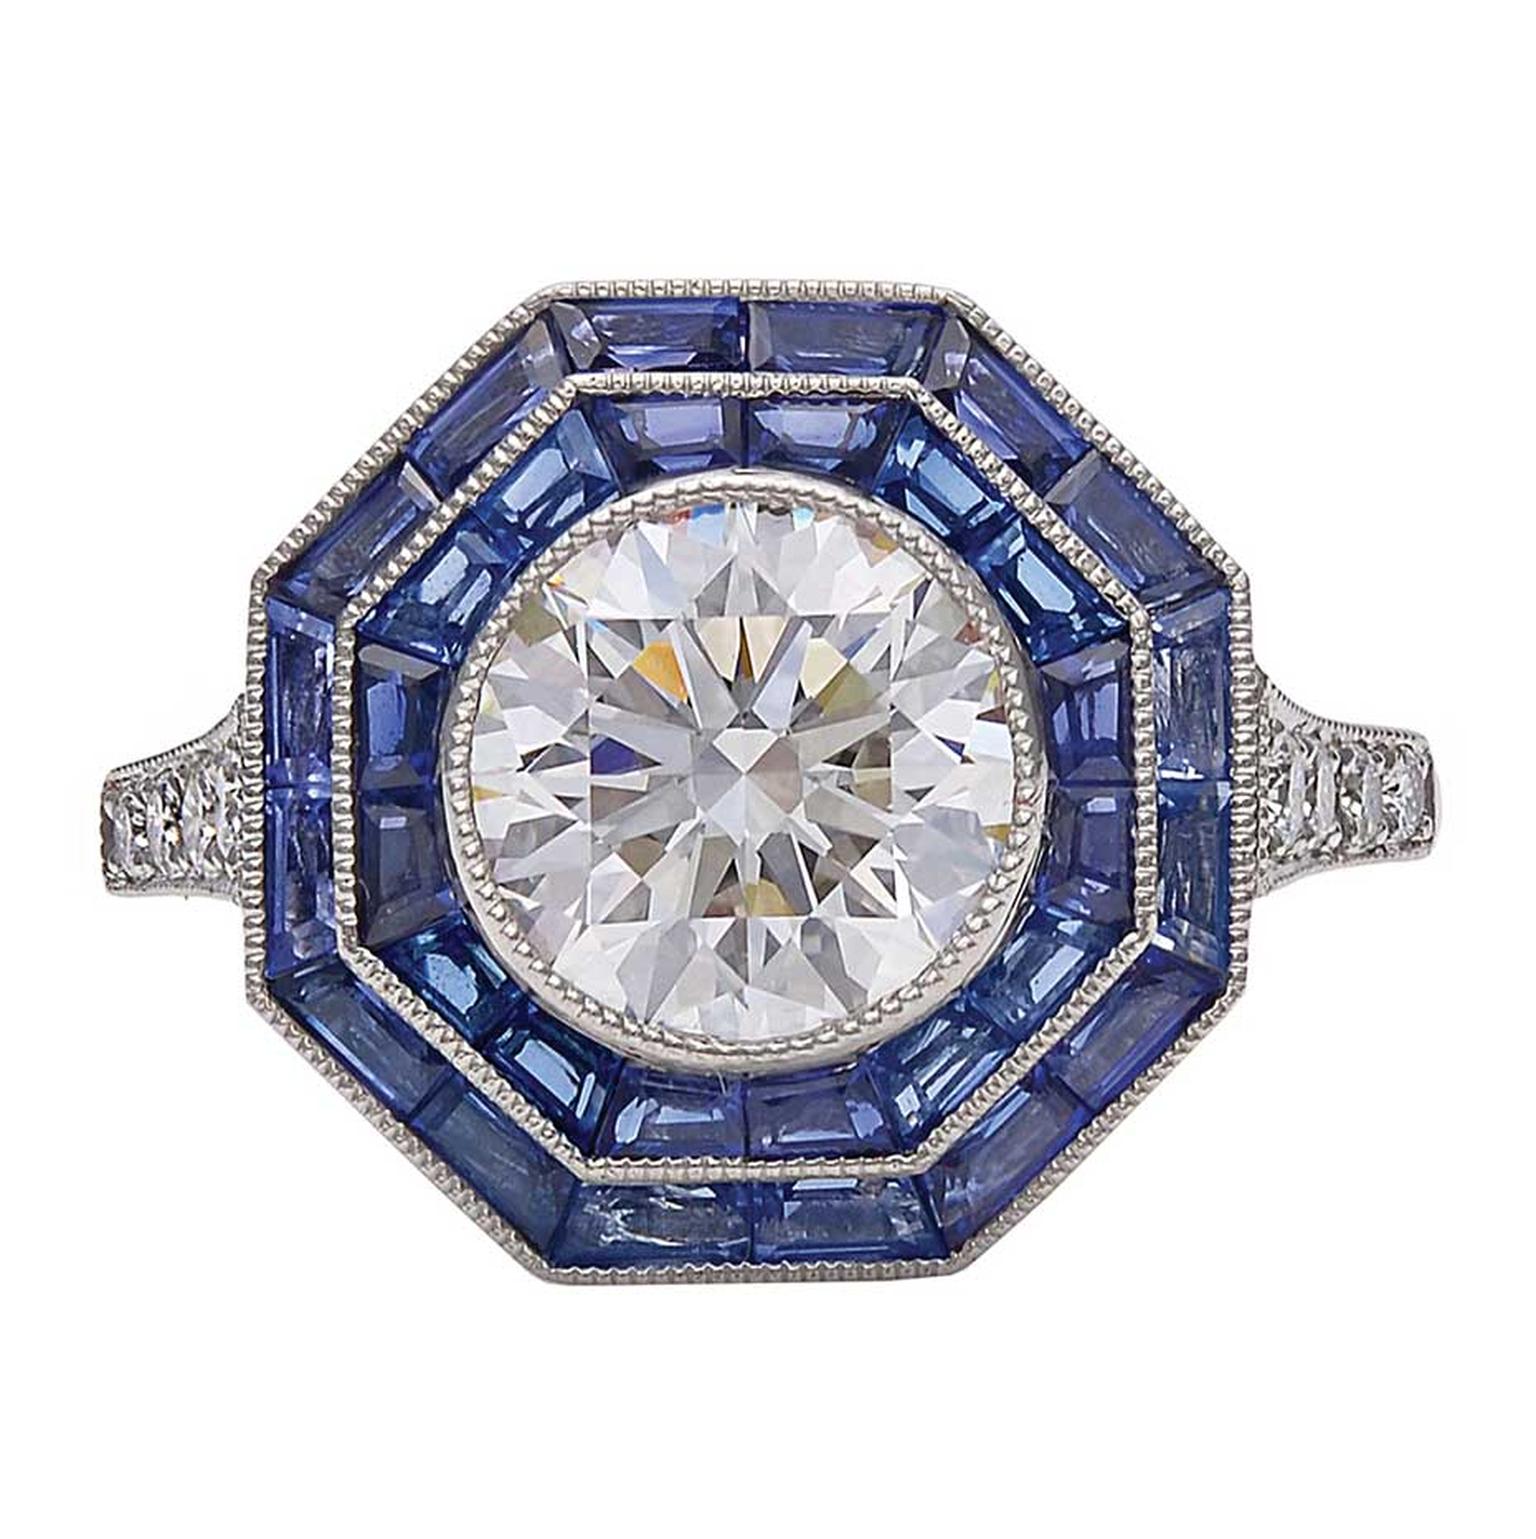 Vintage engagement ring by Tiffany & Co. with sapphires and